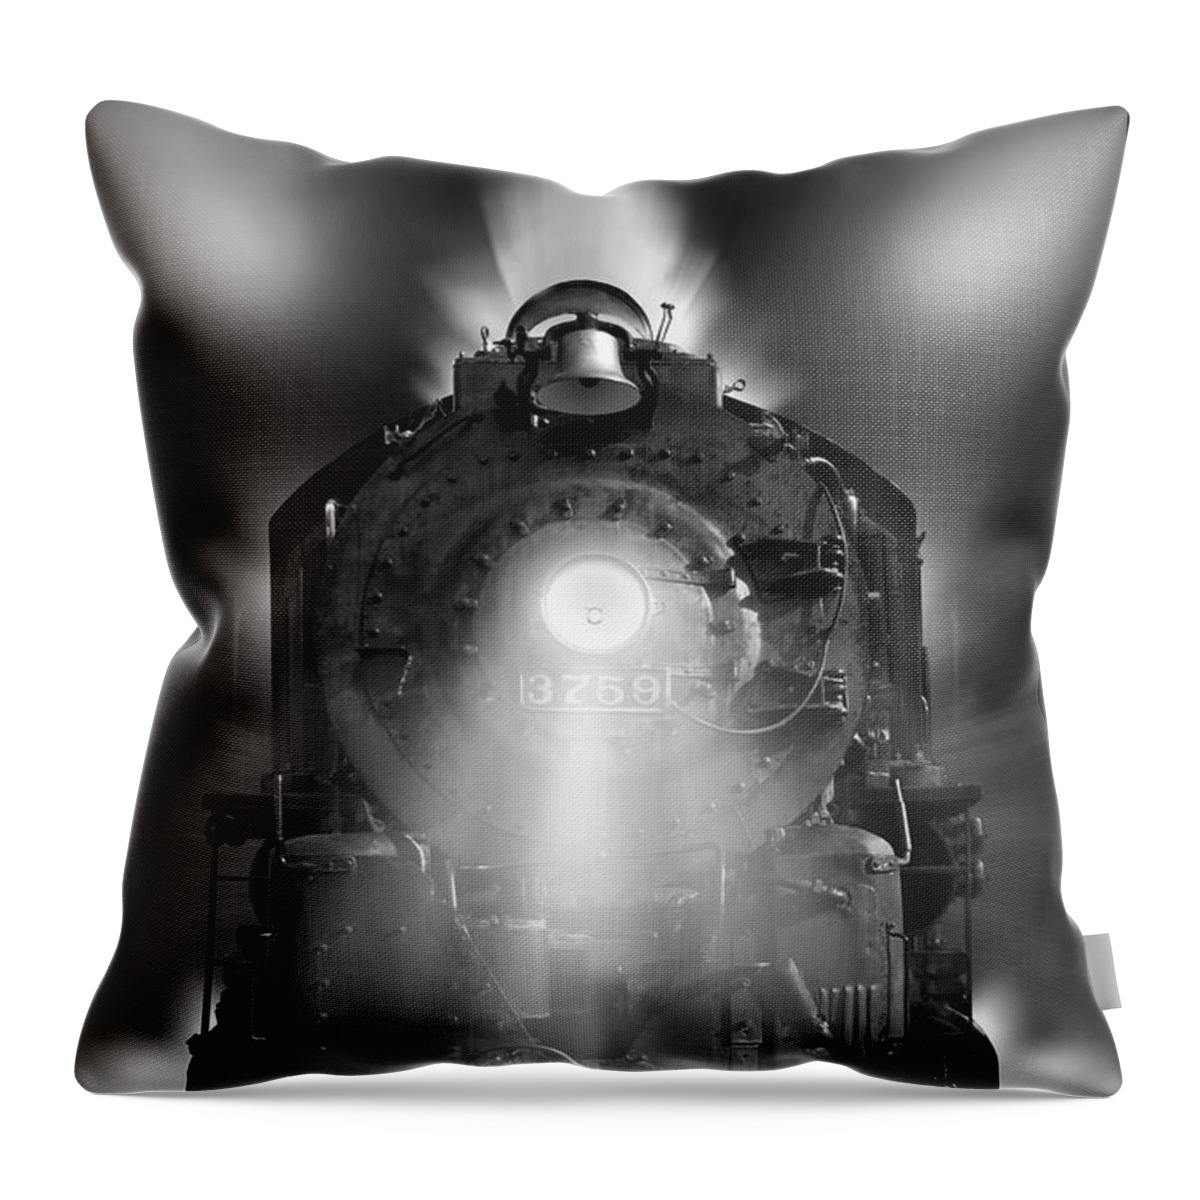 Transportation Throw Pillow featuring the photograph Night Train On The Move by Mike McGlothlen